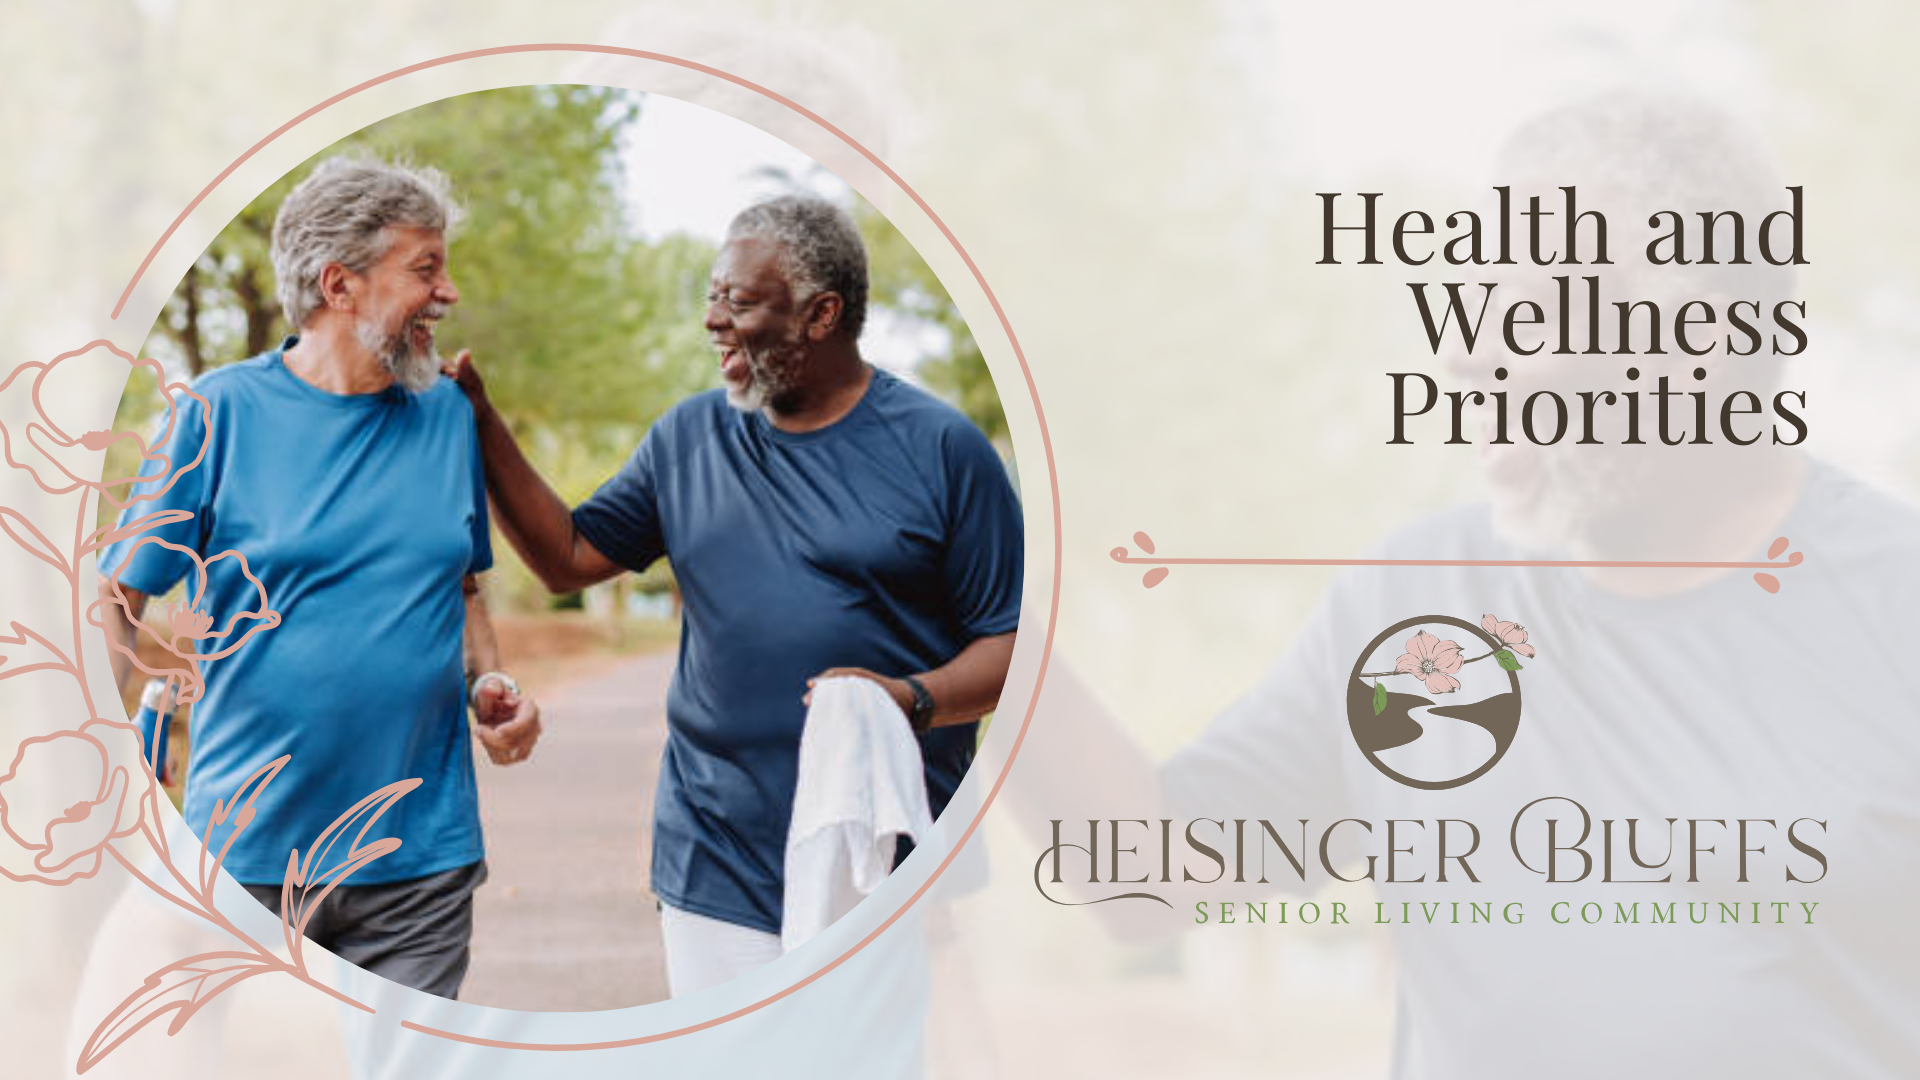 Independent Living communities in Jefferson City offer wellness programs, fitness centers, and a variety of activities to promote a healthy lifestyle